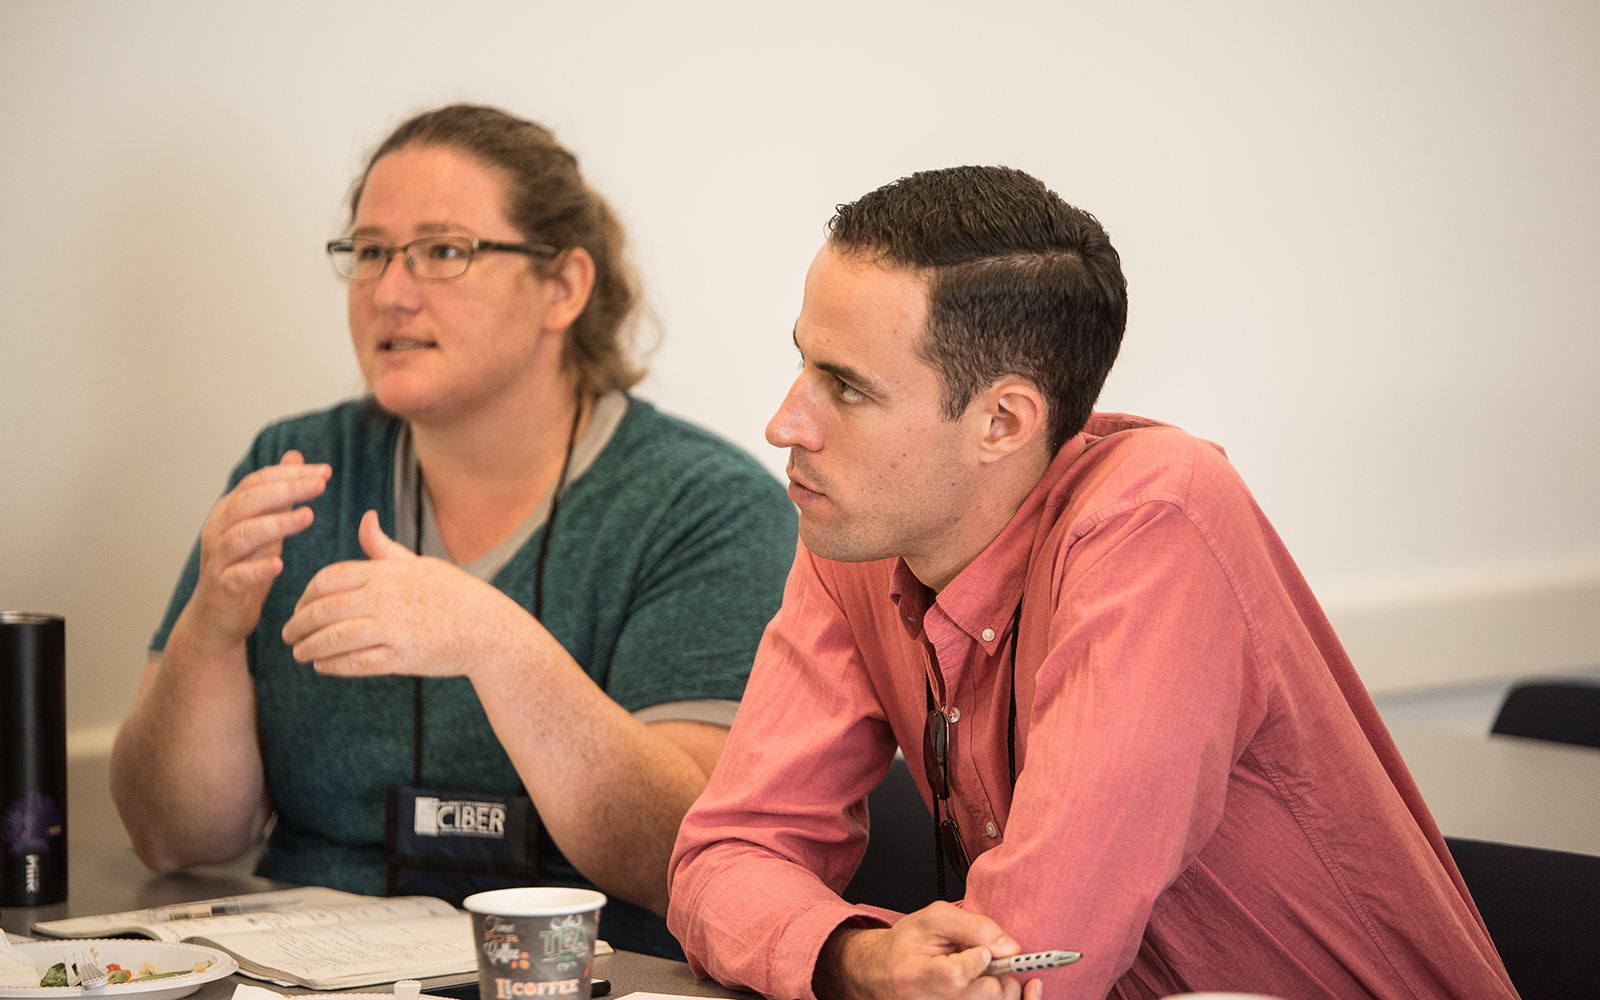 Jen Rhymer, a Ph.D. student at University of Washington, and her friend and co-author Alex Murray, a professor and chair of entrepreneurship at ETH Zurich, react to a discussion. Murray is a co-organizer of the symposium. (Nathan Oldham/UConn School of Business)